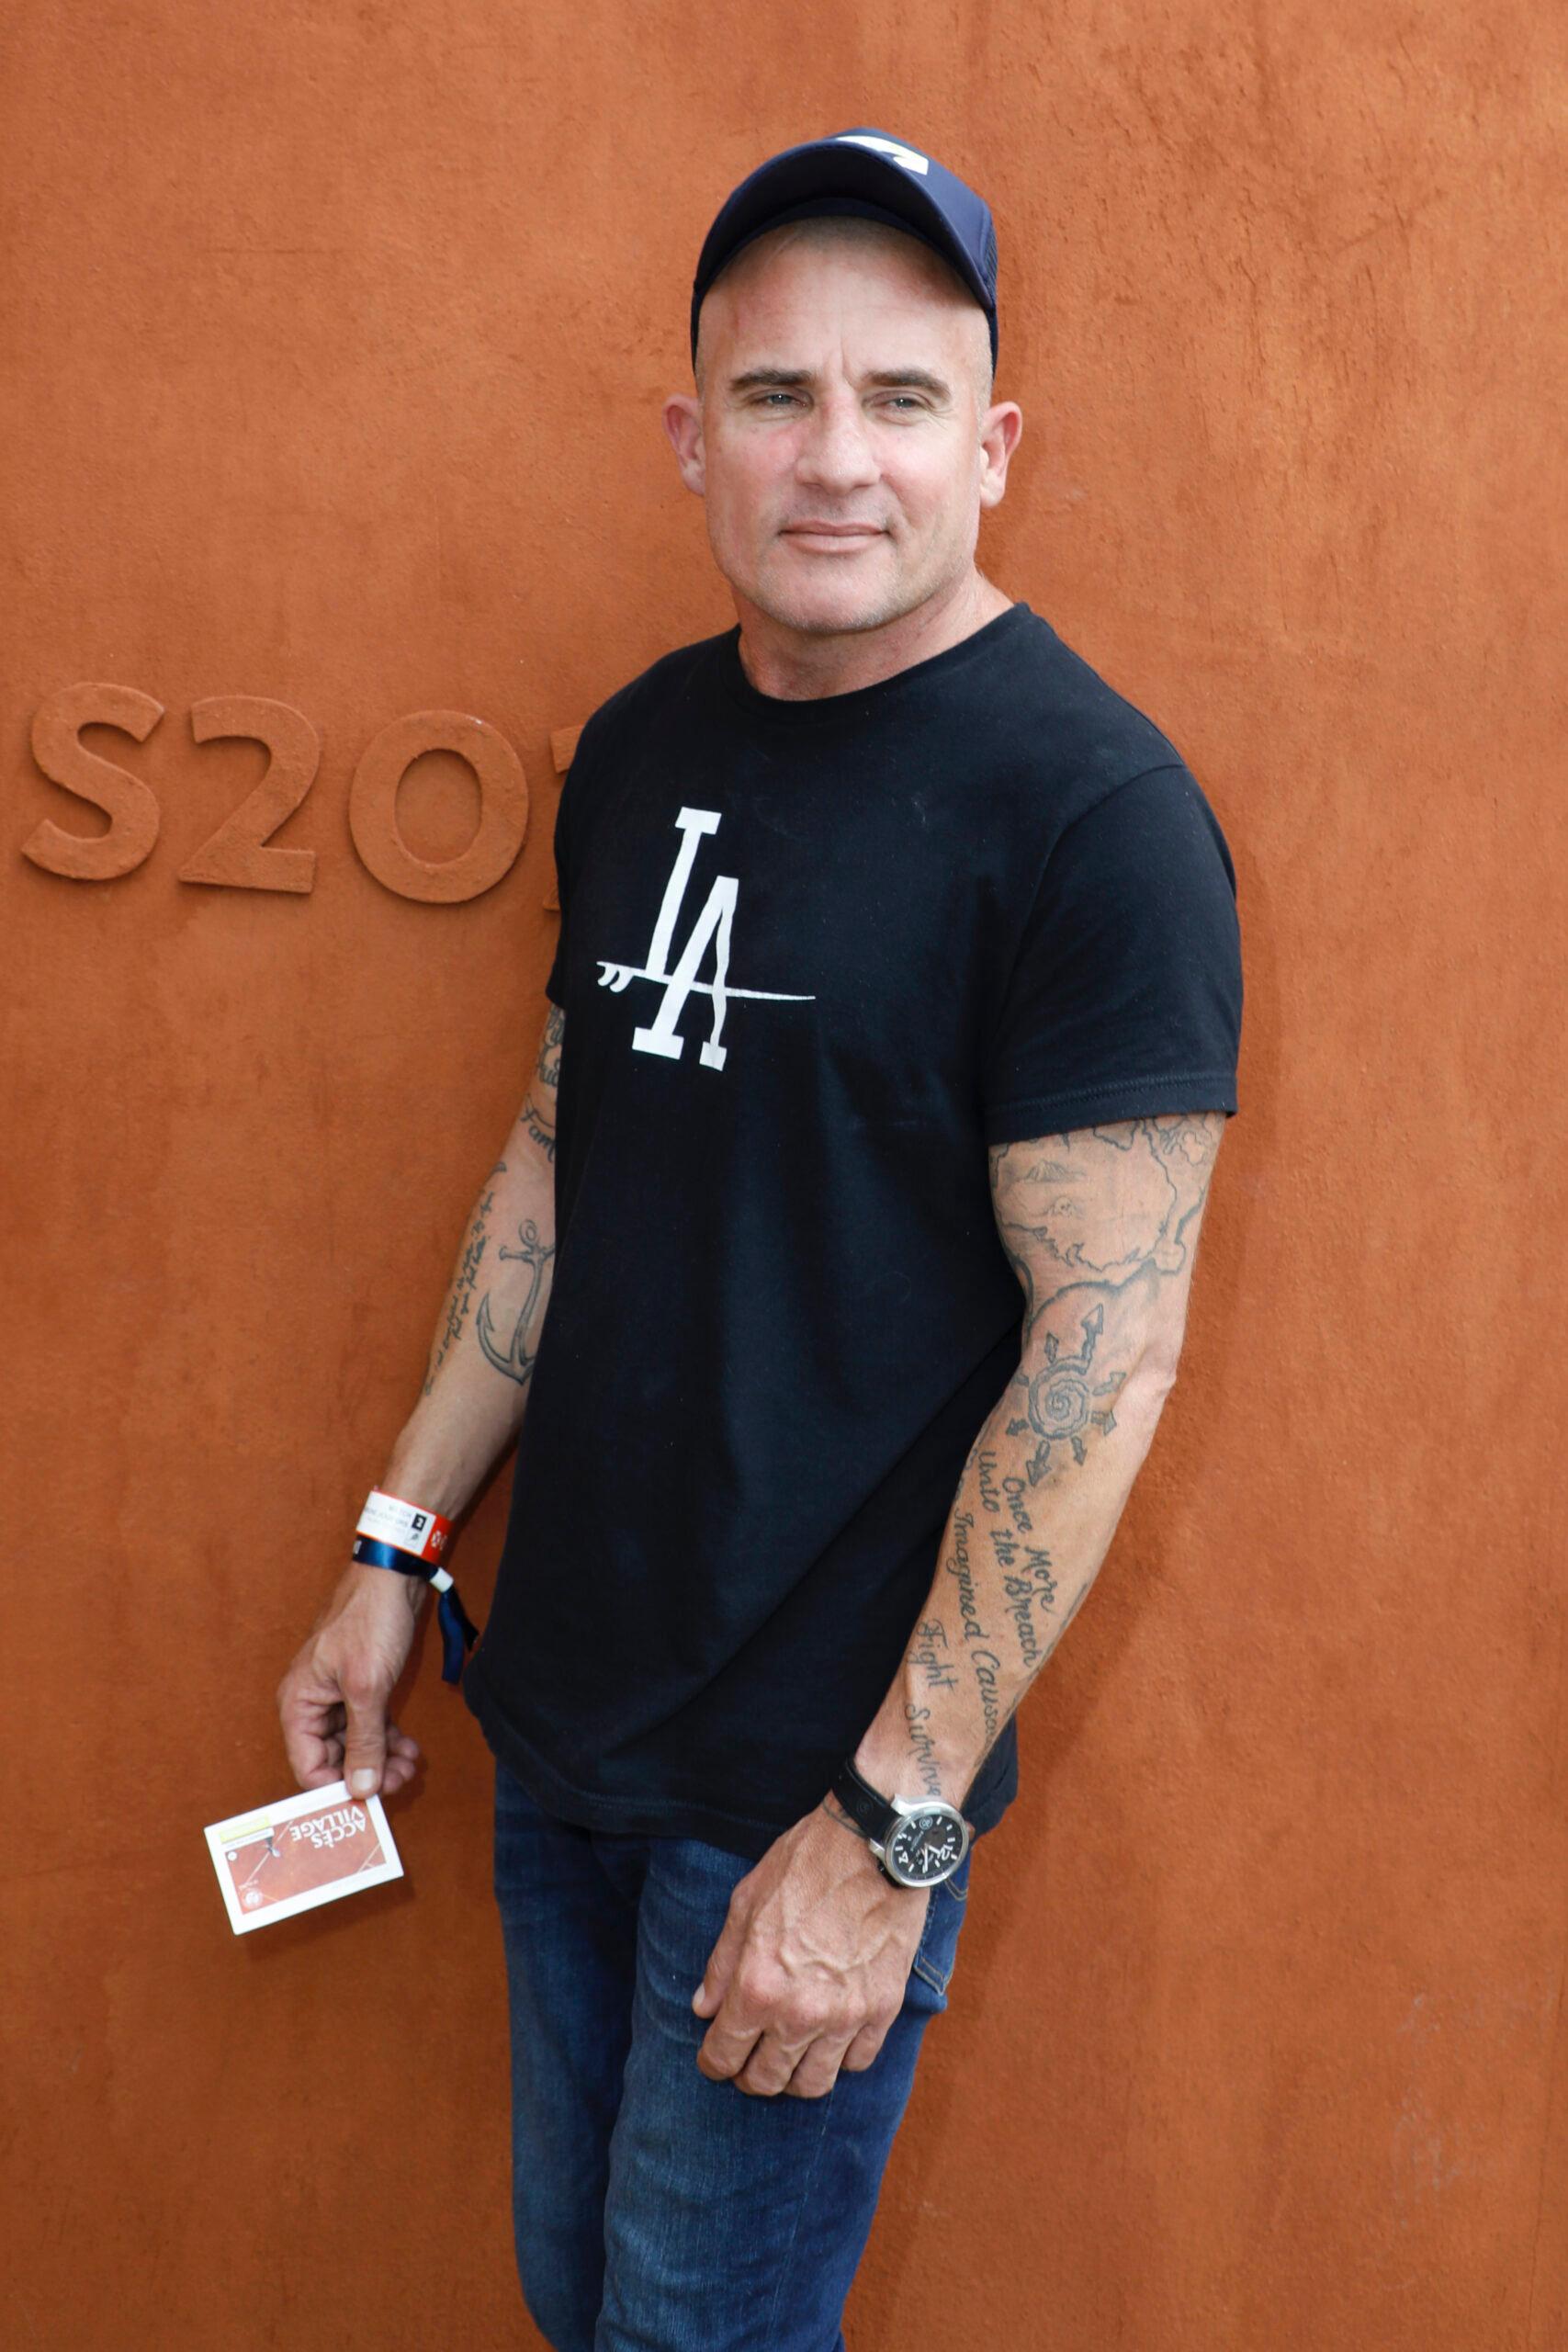 Dominic Purcell attends the french open 2017 at Roland Garros